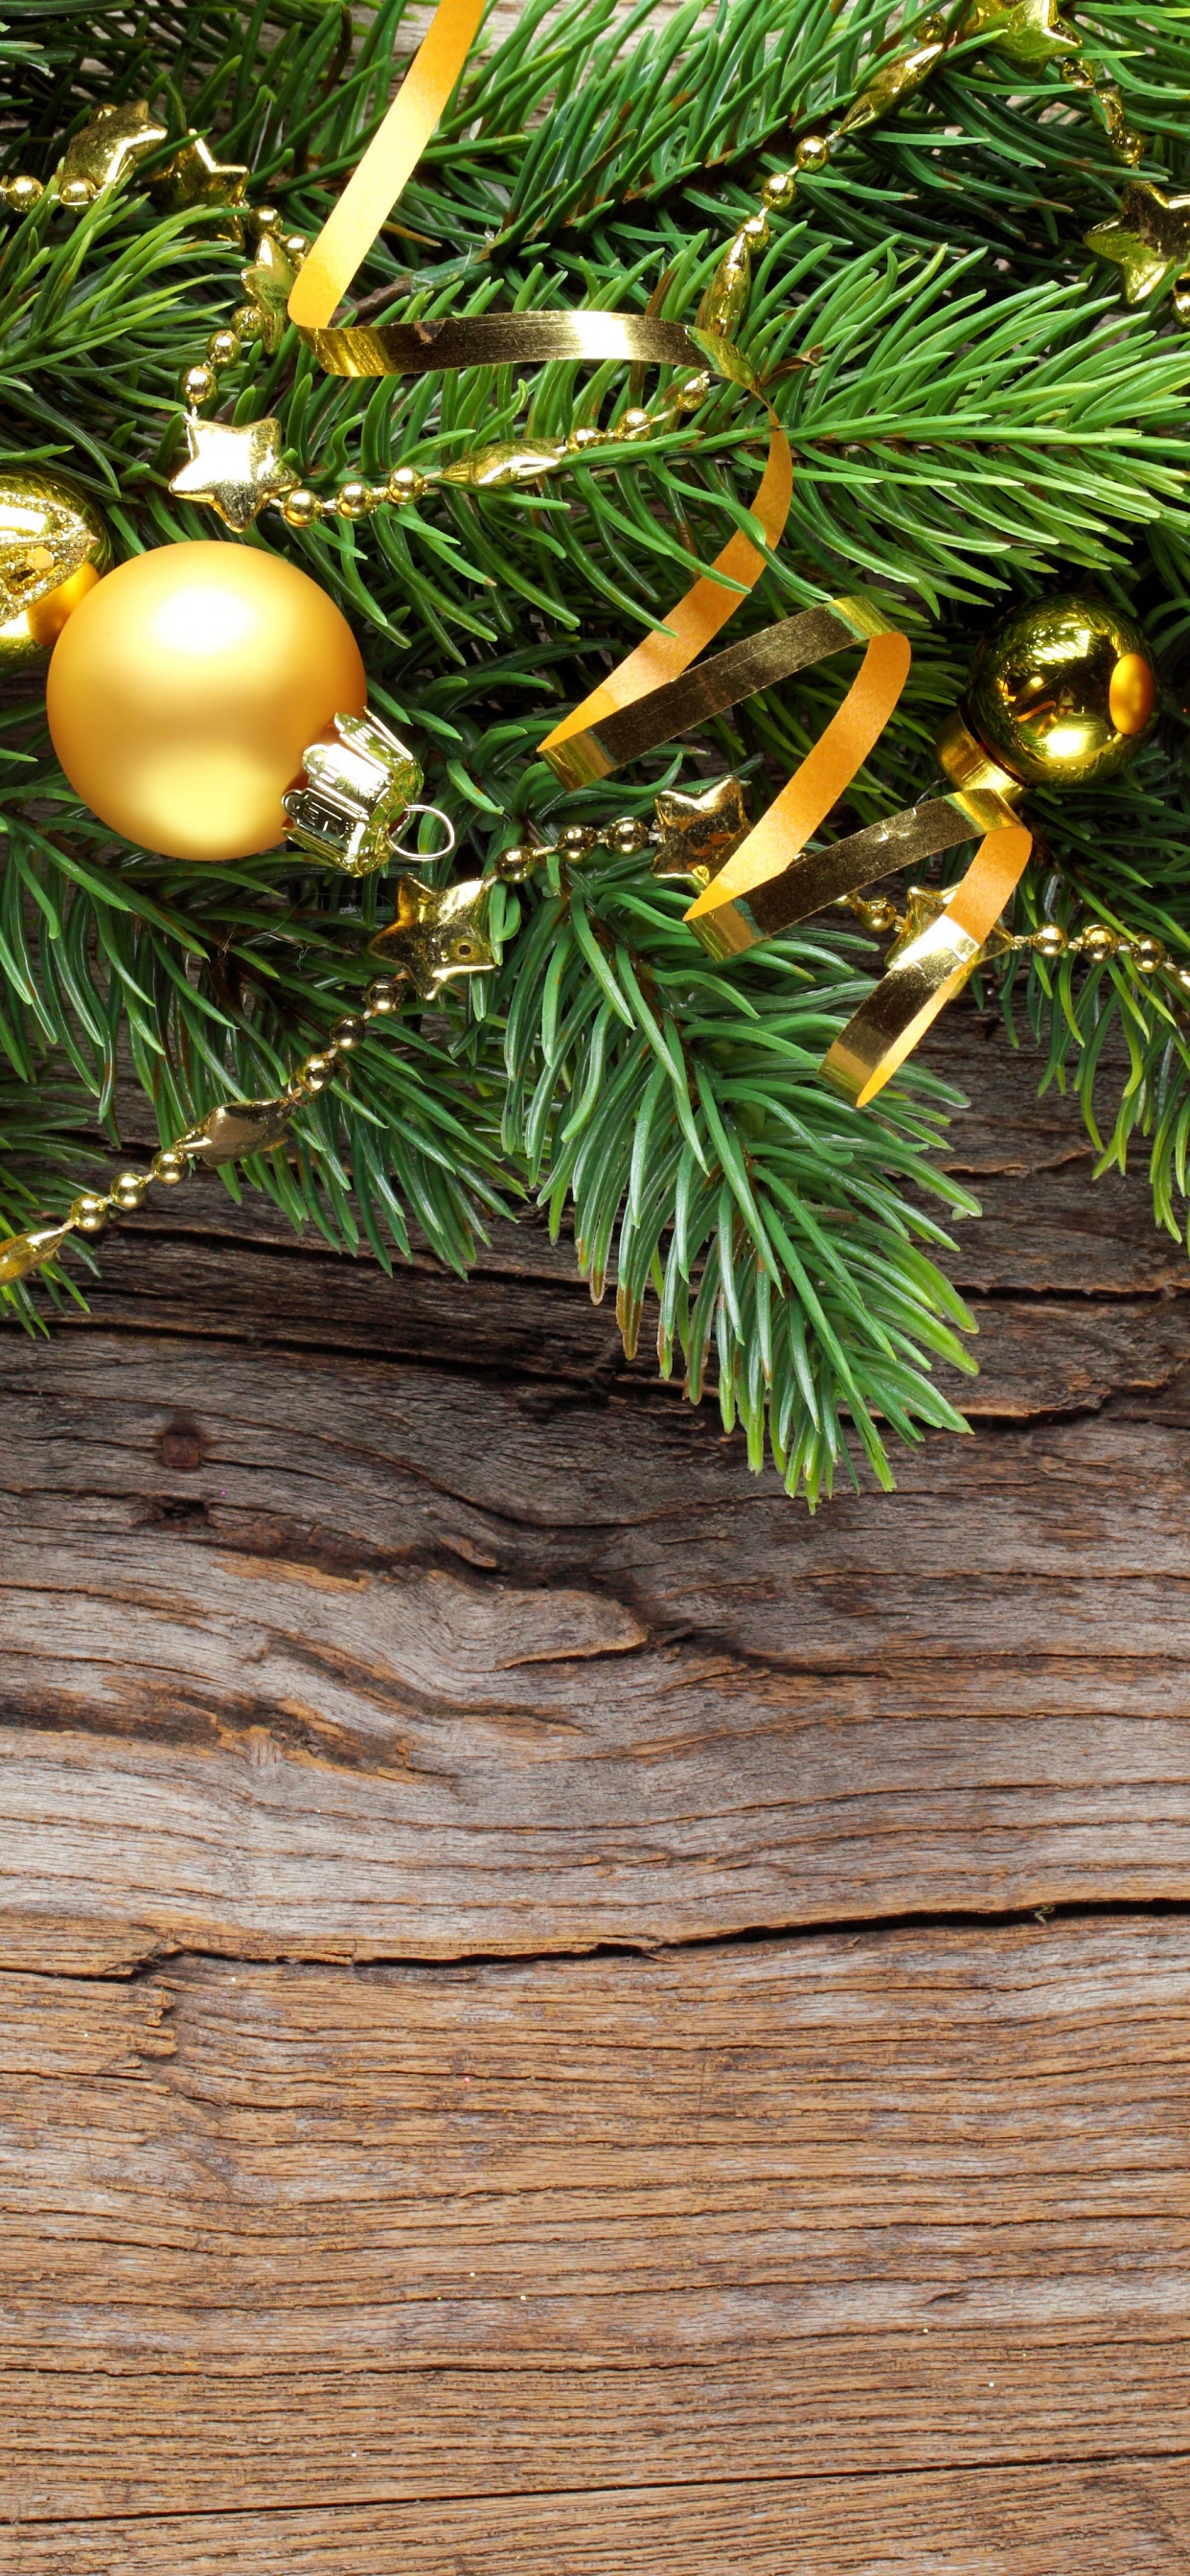 Christmas Day, Christmas Tree, New Year, Holiday, Christmas Decoration. Wallpaper in 1242x2688 Resolution